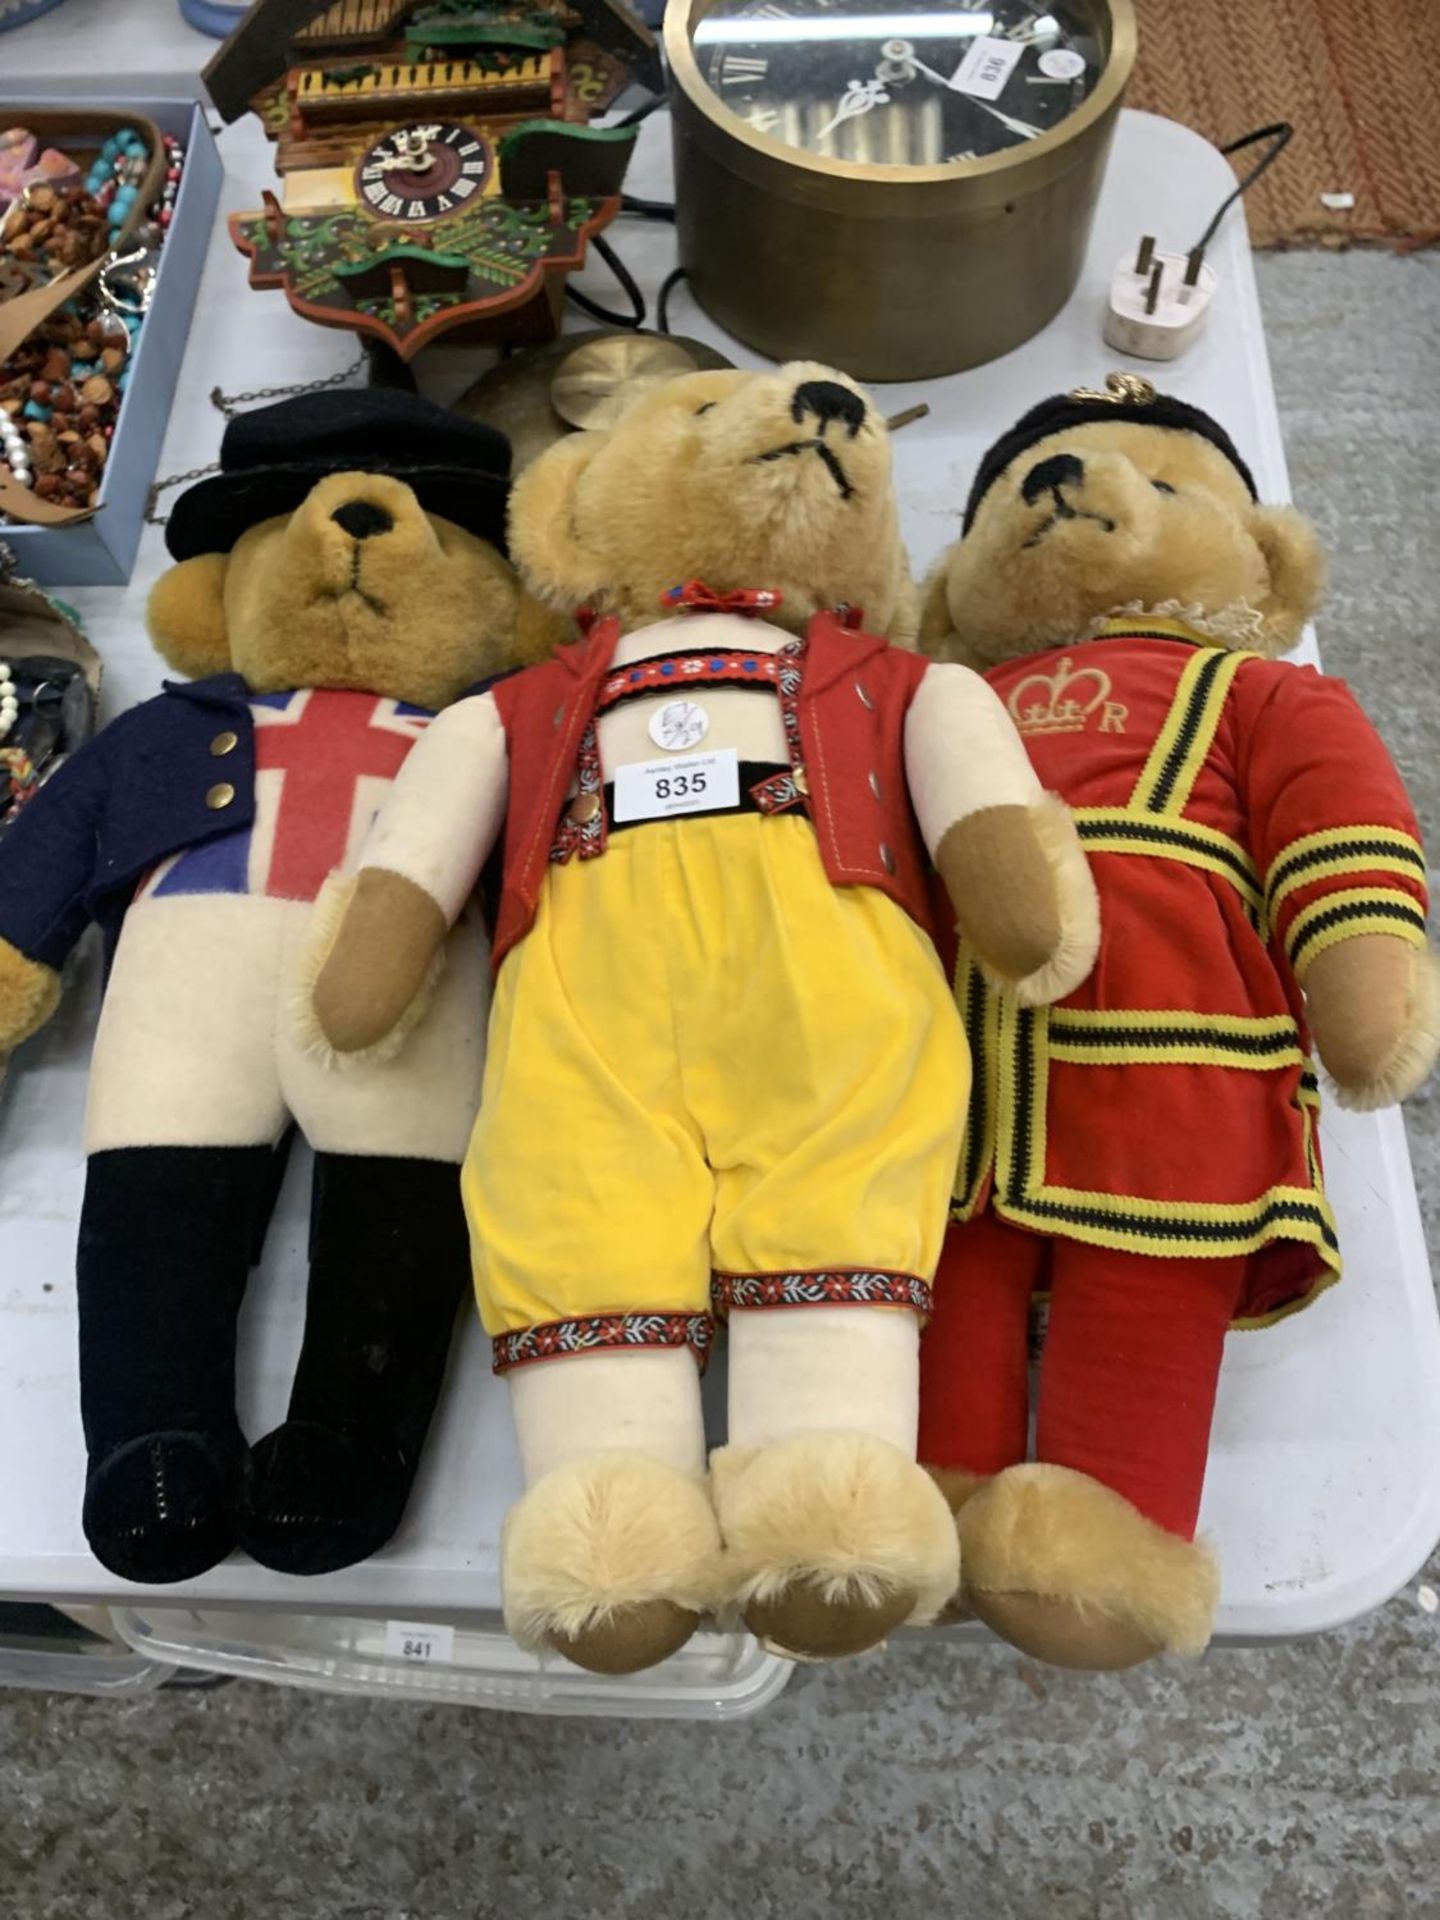 THREE VINTAGE MERRYTHOUGHT TEDDY BEARS, TWO IN ROYAL REGALIA, ALL WITH THE MERRYTHOUGHT LABEL